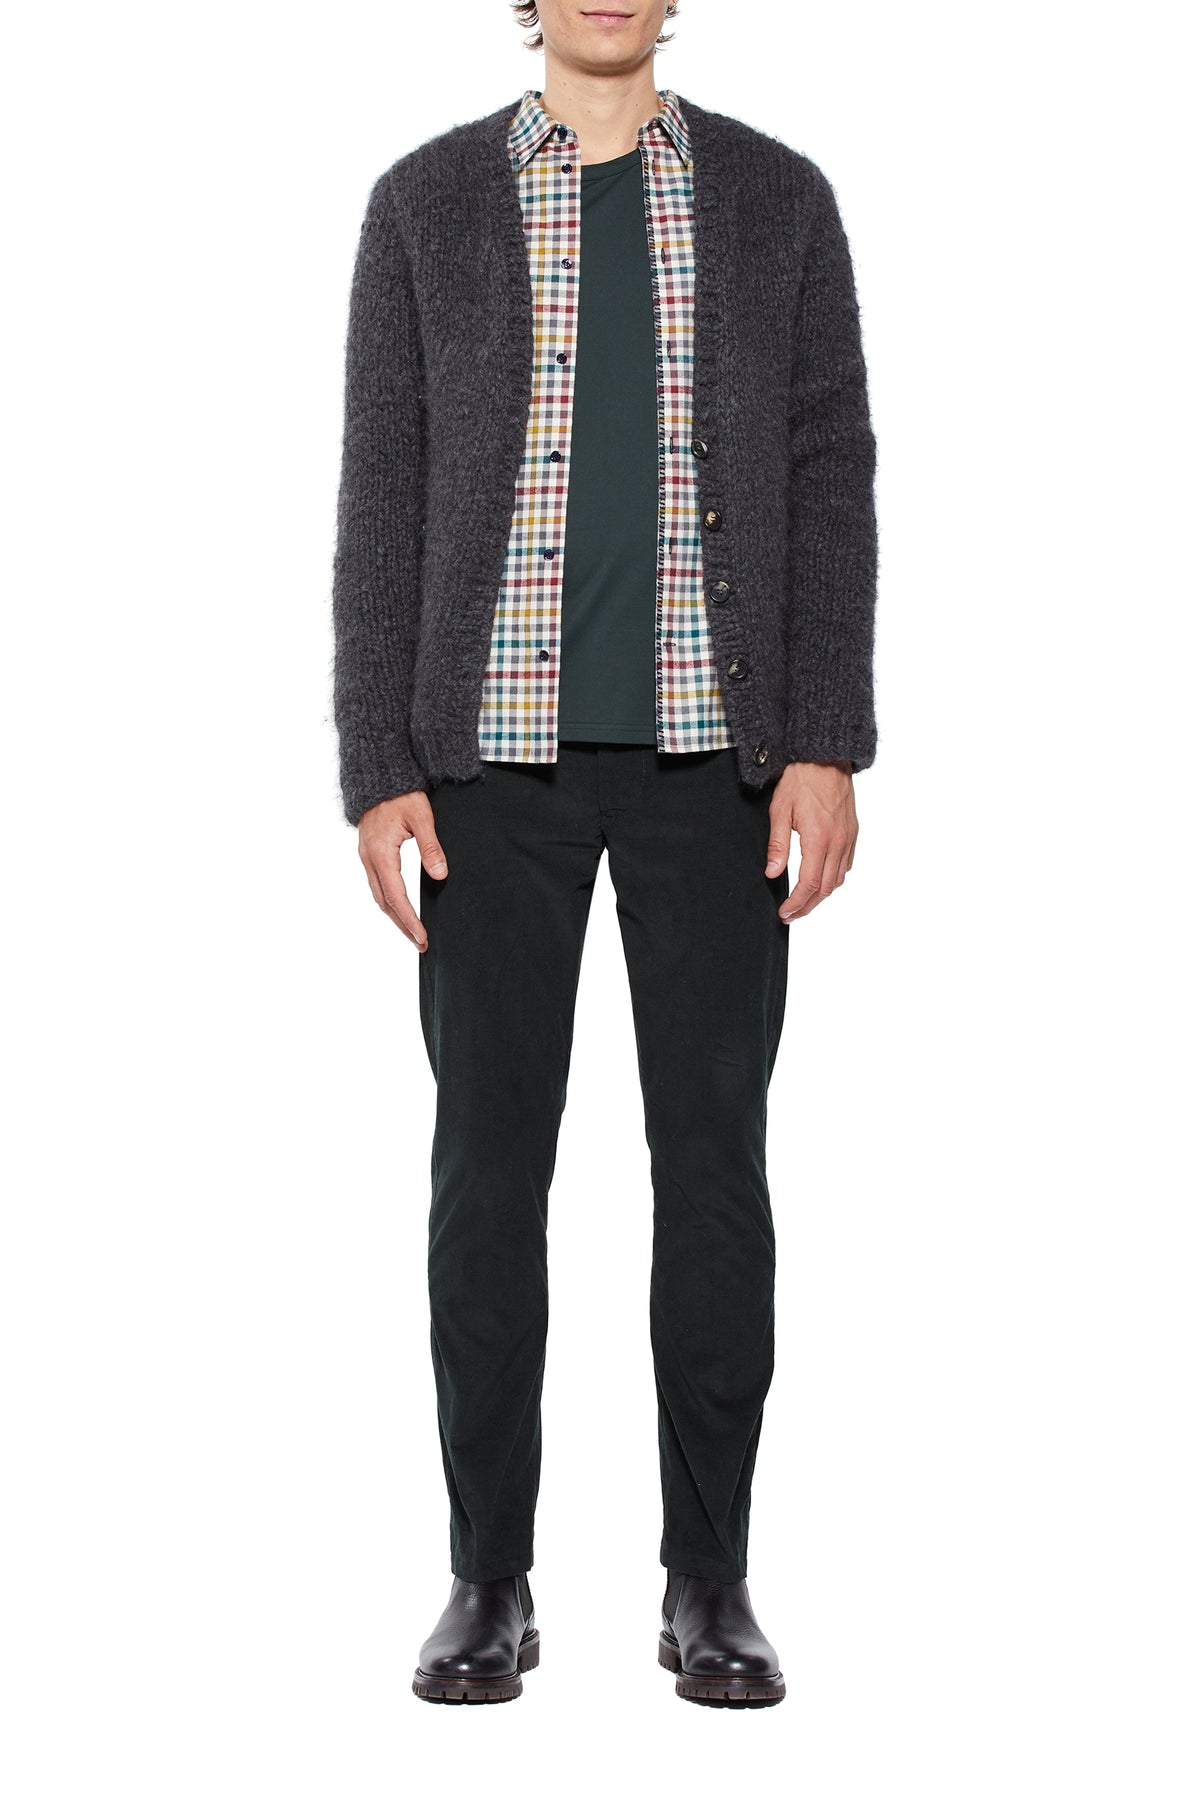 Simon Knit Cardigan in Charcoal Welfat Cashmere